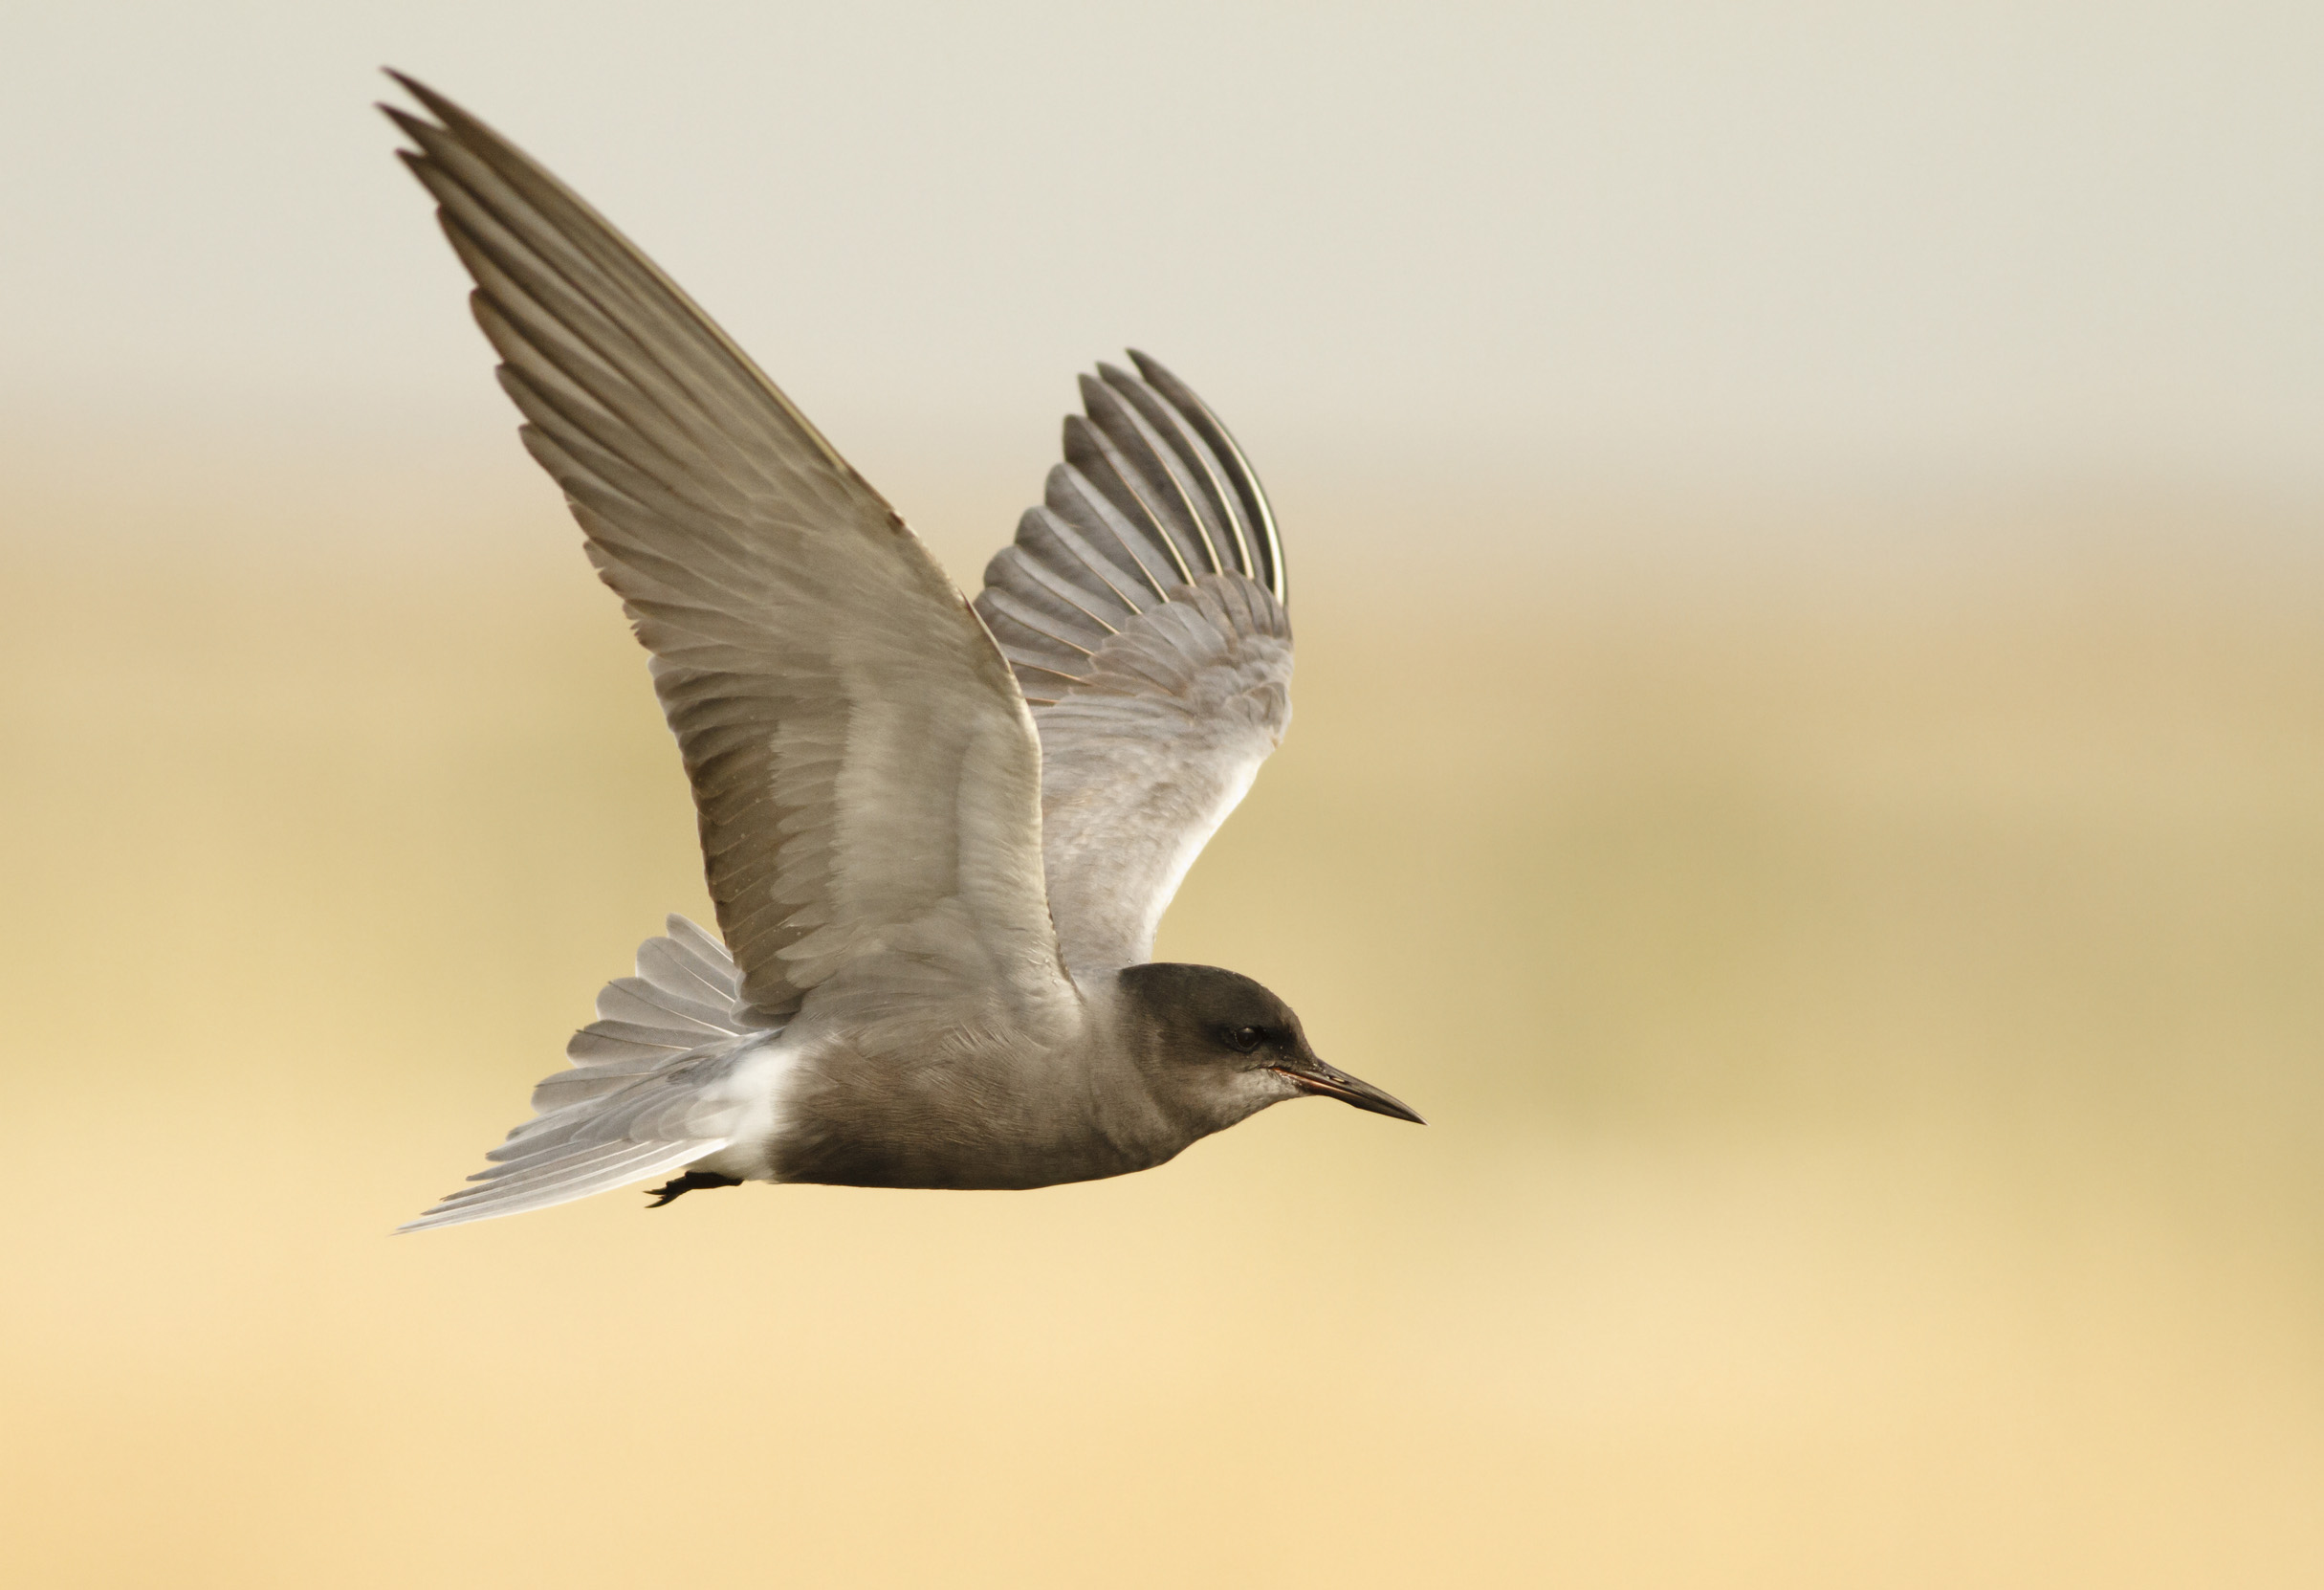 A lone Black Tern in mid flight against a pale yellow background.